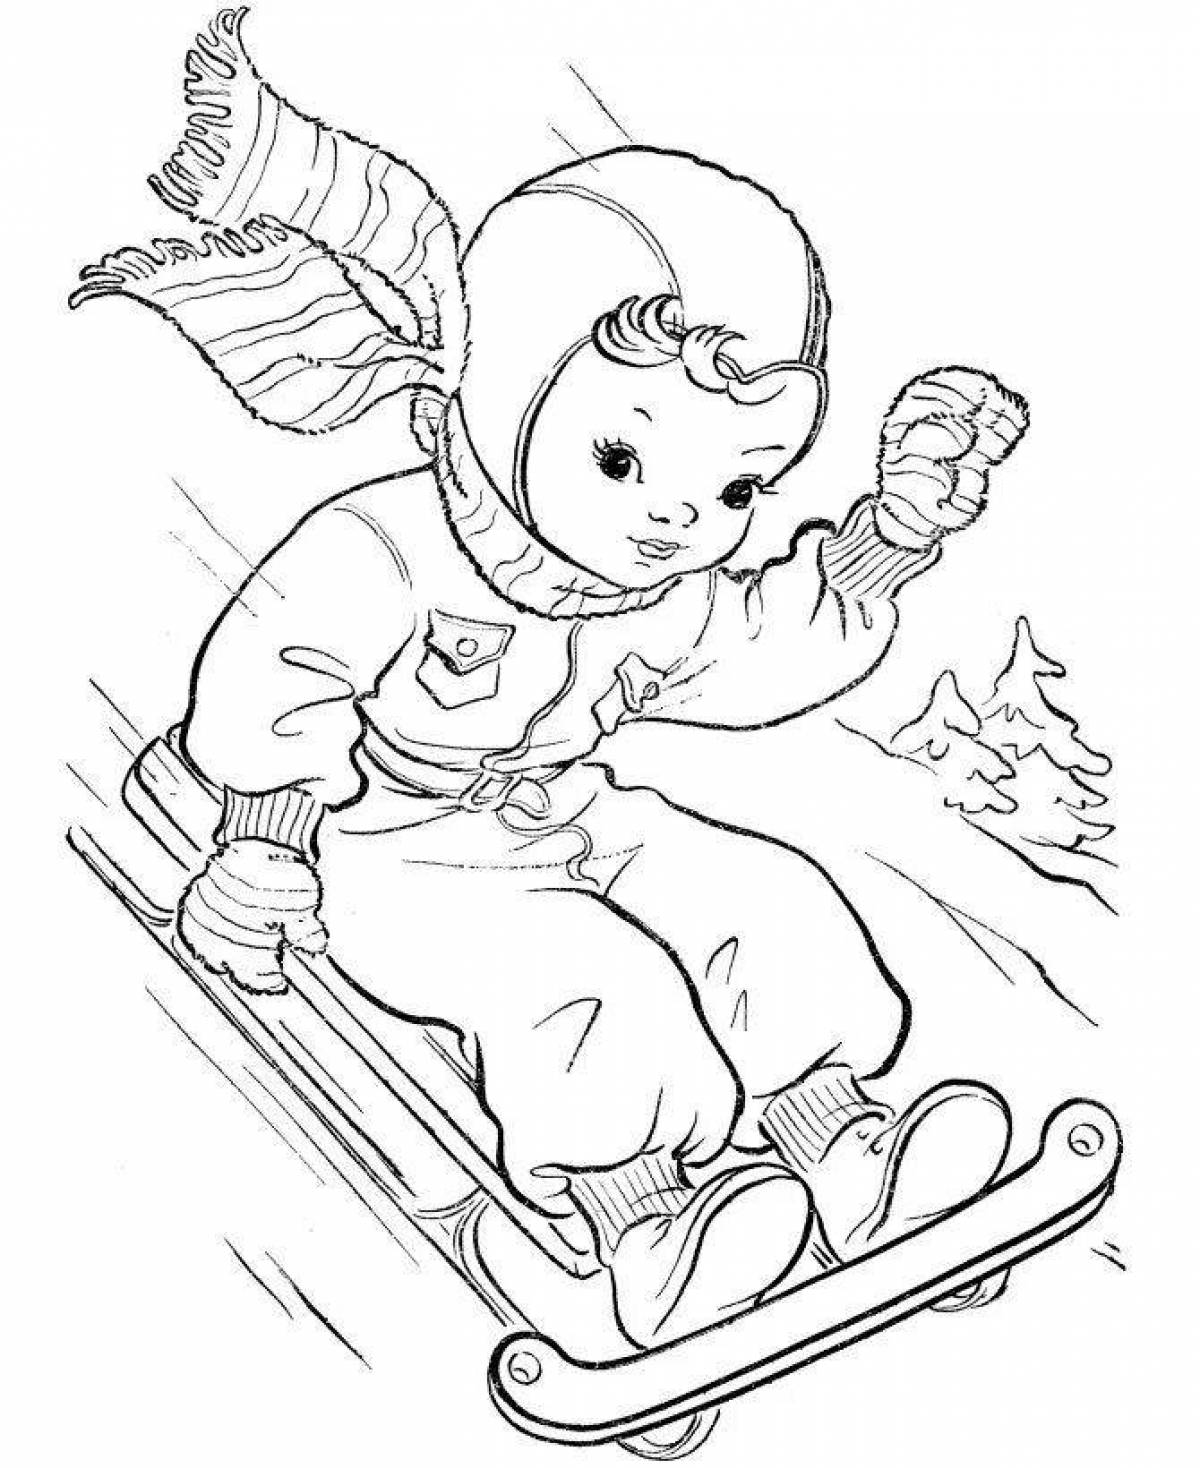 Coloring book glowing sled